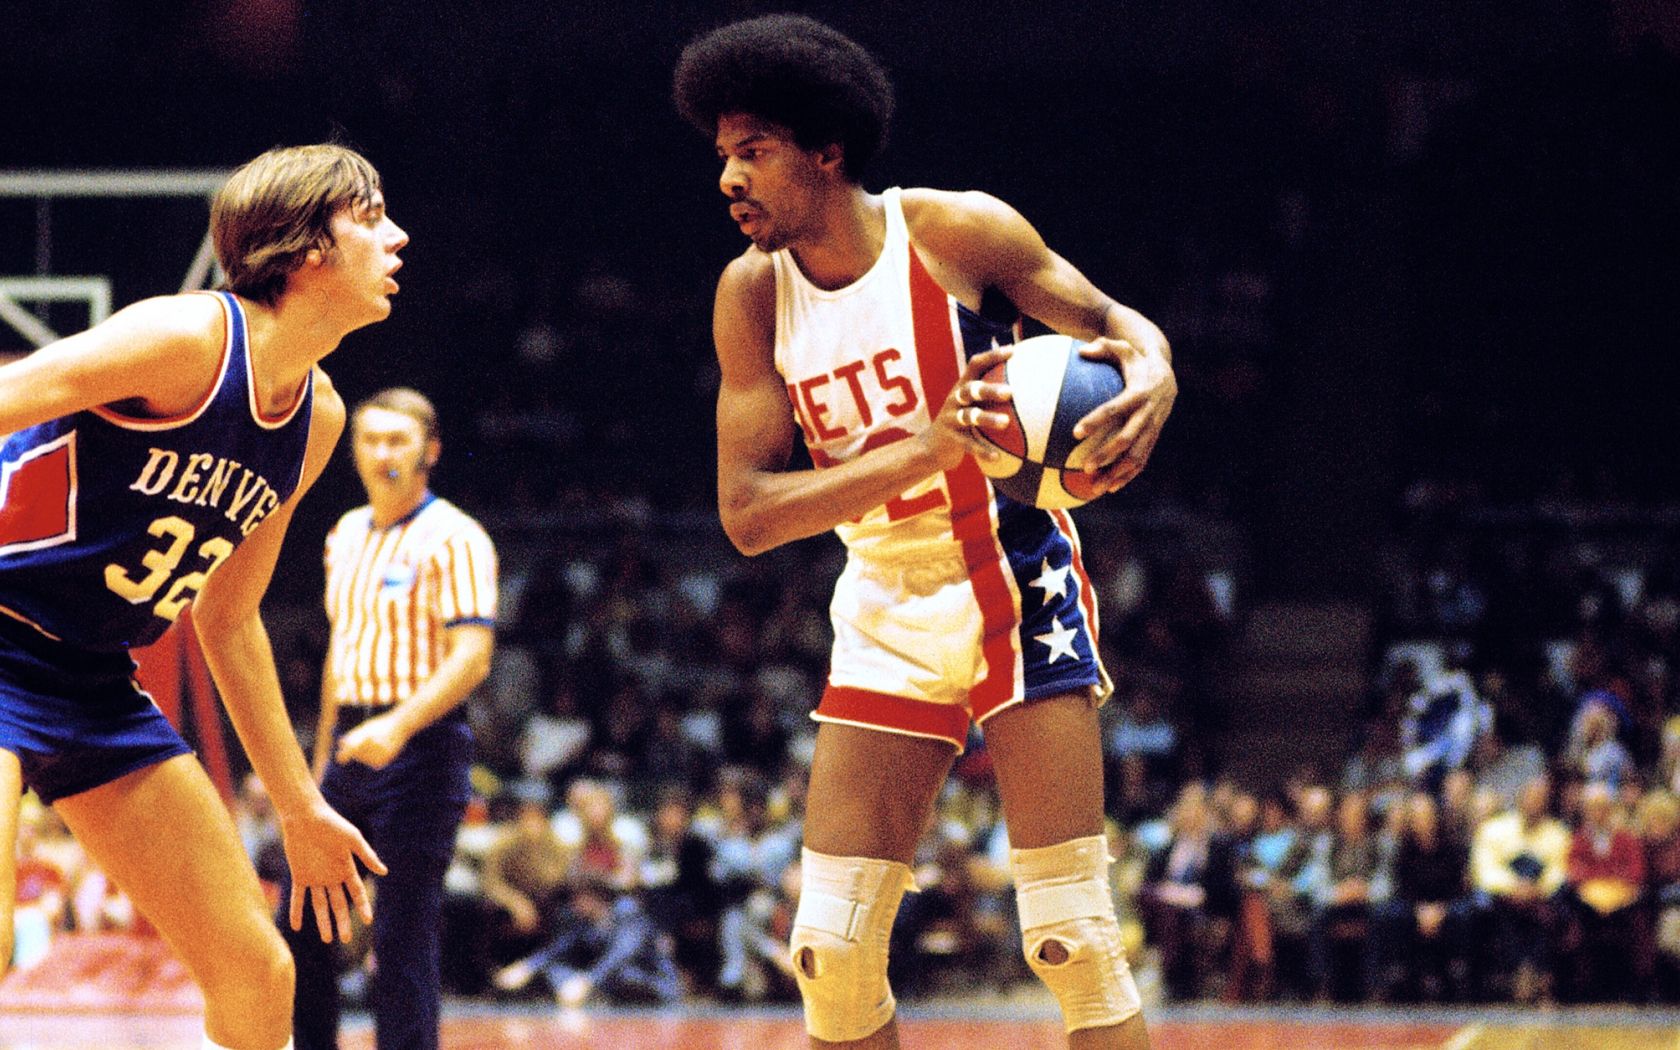 Free download Julius Erving Dr J is one of the greatest Nets